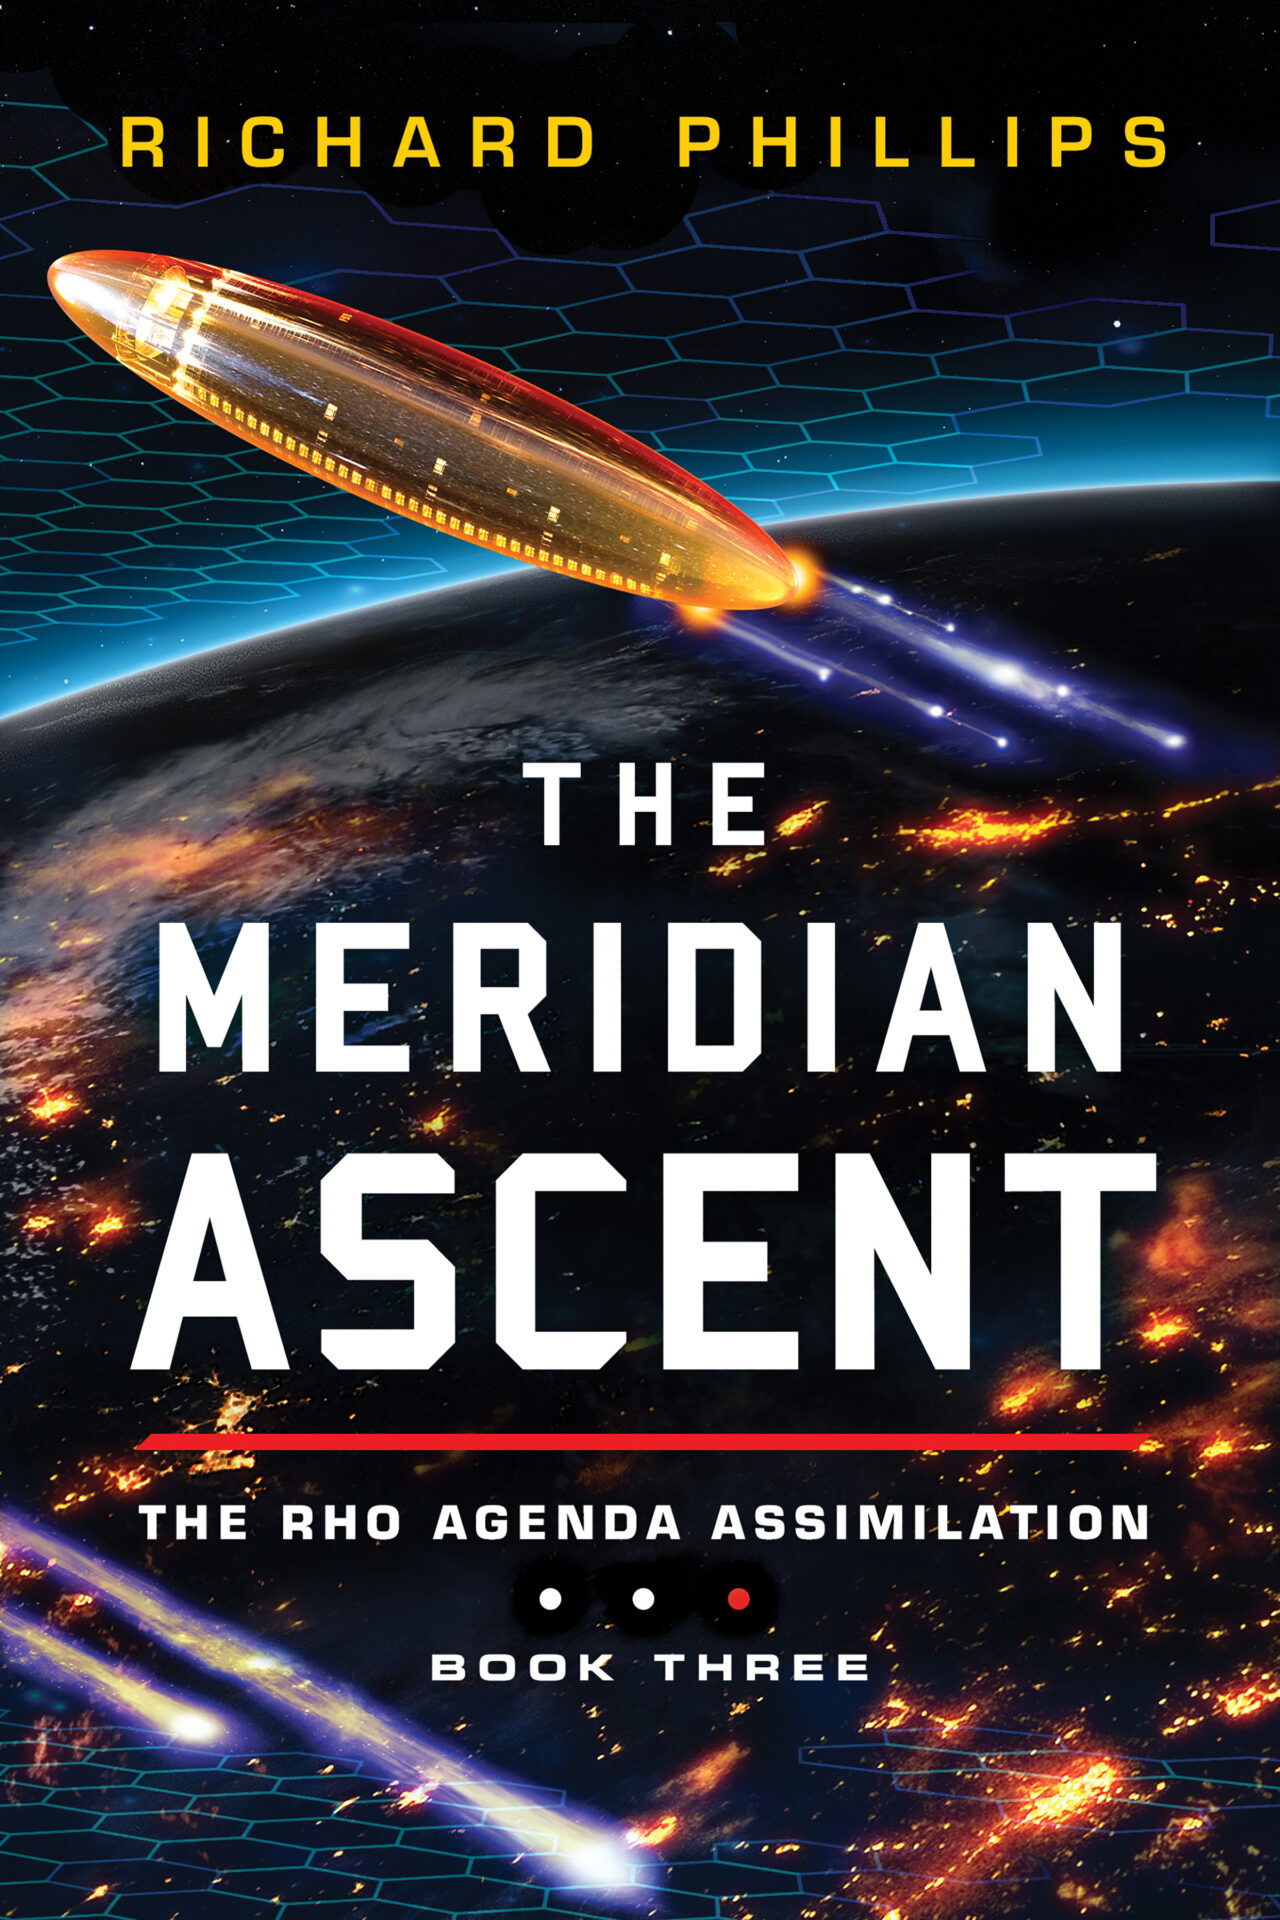 The Meridian Ascent by Richard Phillips